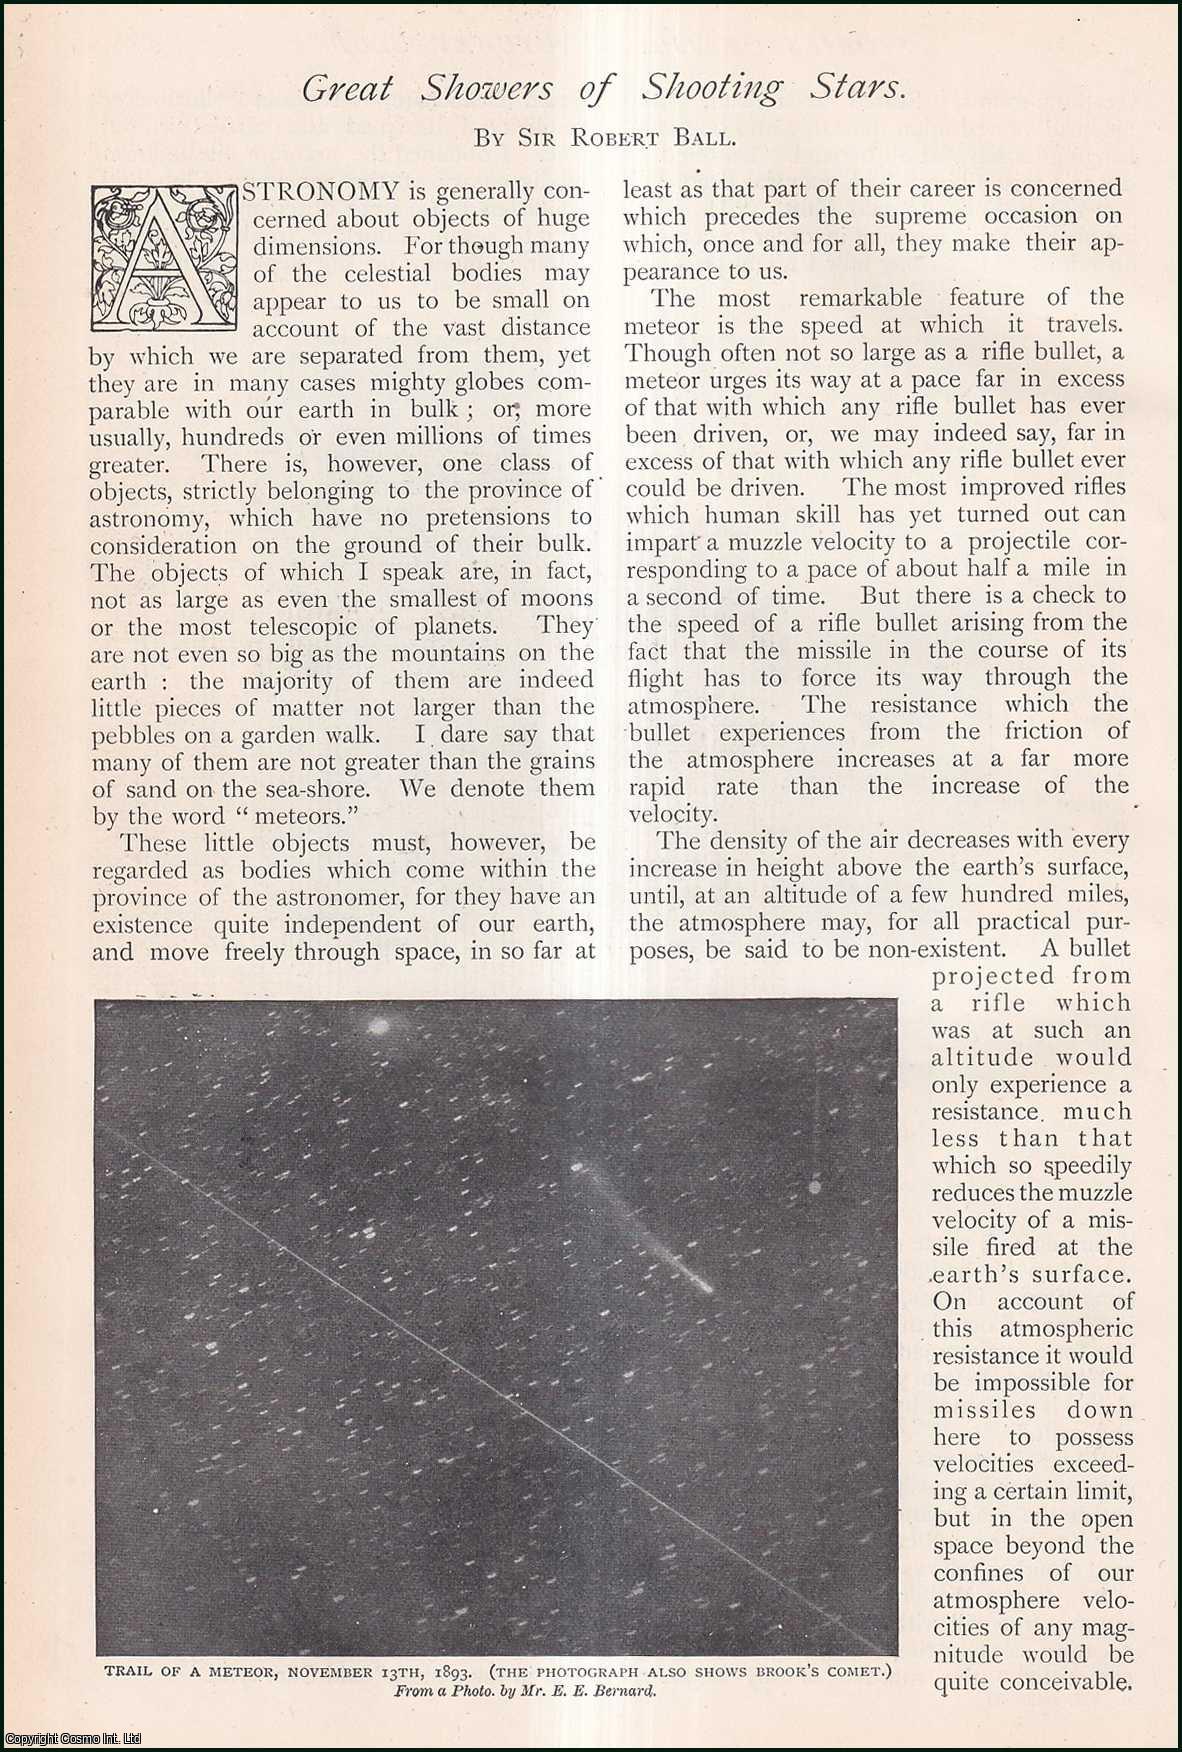 Sir Robert Ball - Astronomy. Great Showers of Shooting Stars. An uncommon original article from The Strand Magazine, 1899.